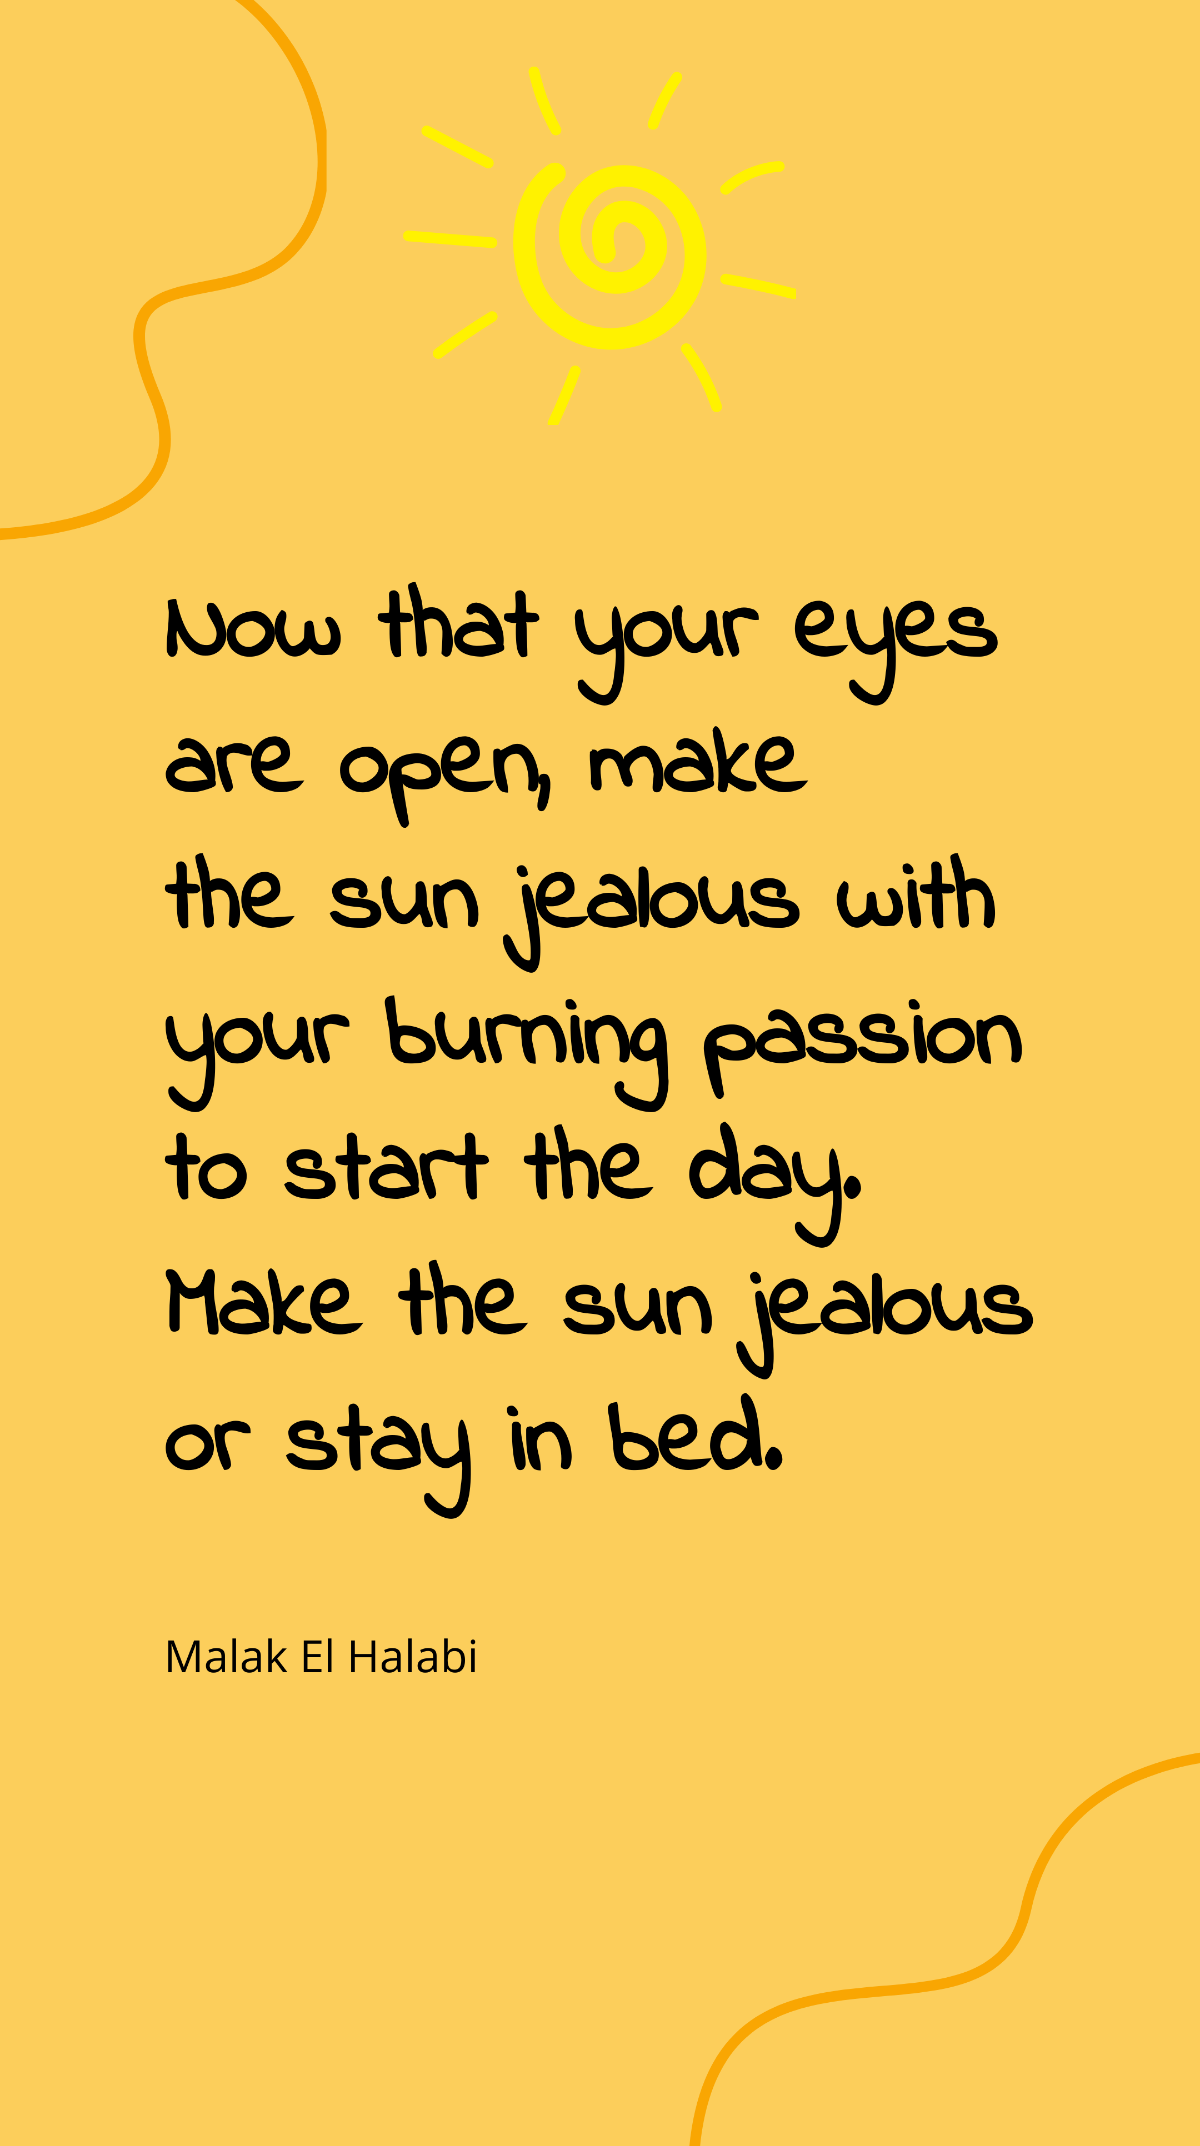 Malak El Halabi - Now that your eyes are open, make the sun jealous with your burning passion to start the day. Make the sun jealous or stay in bed. Template